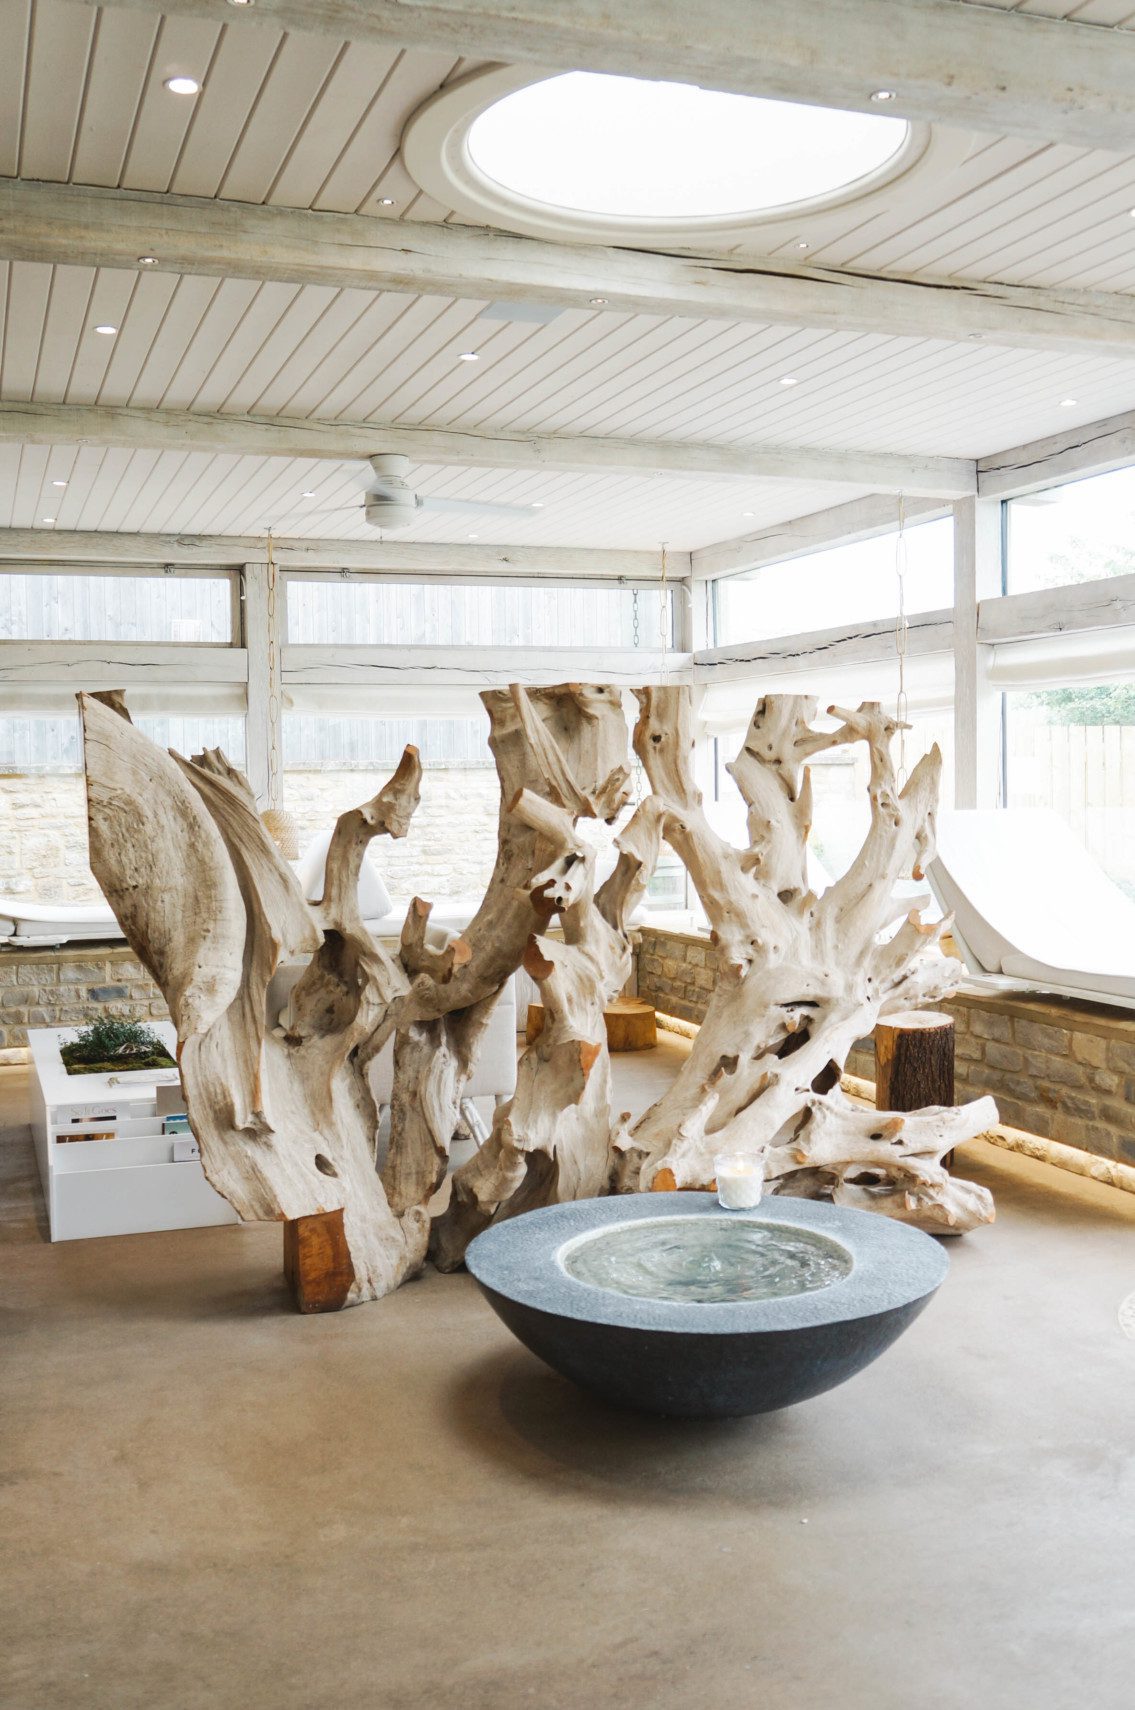 A look inside the Bamford Haybarn Spa, a day spa in the middle of the Cotswolds in the English Countryside.